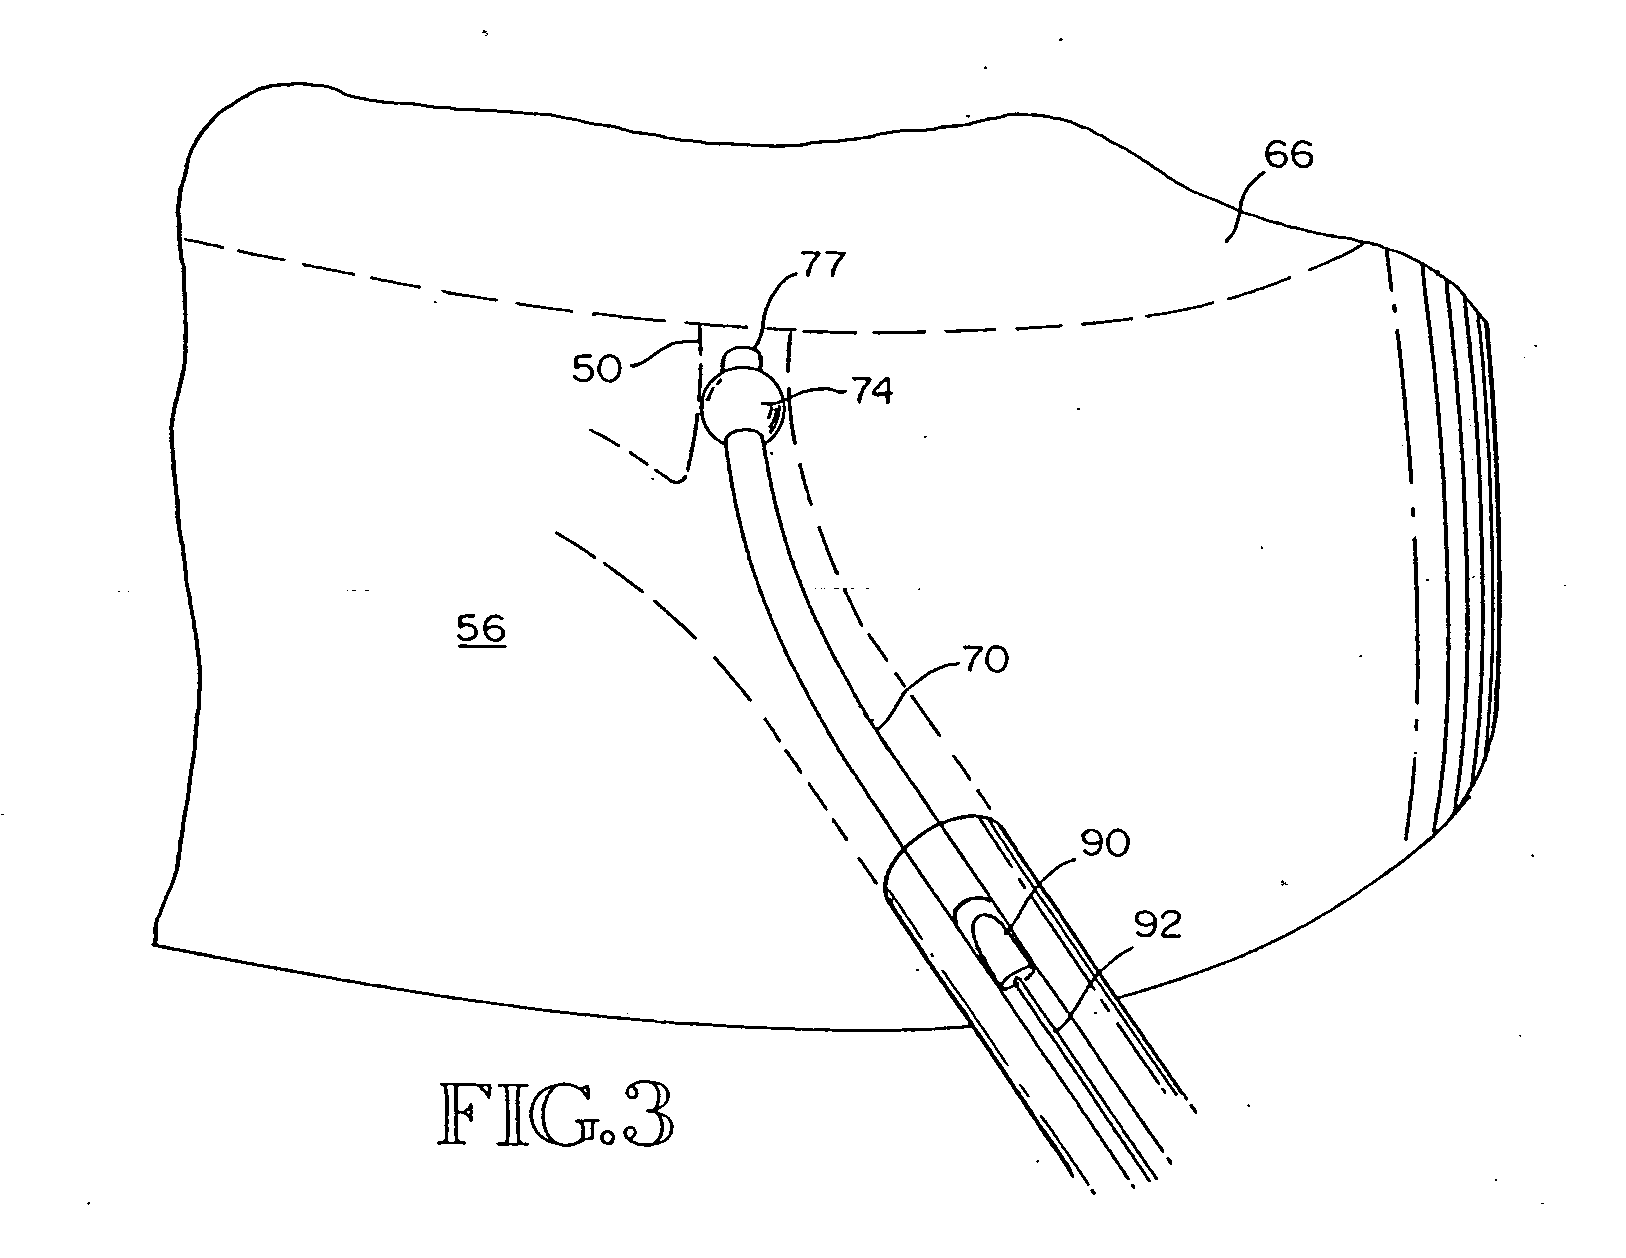 Removable anchored lung volume reduction device and methods